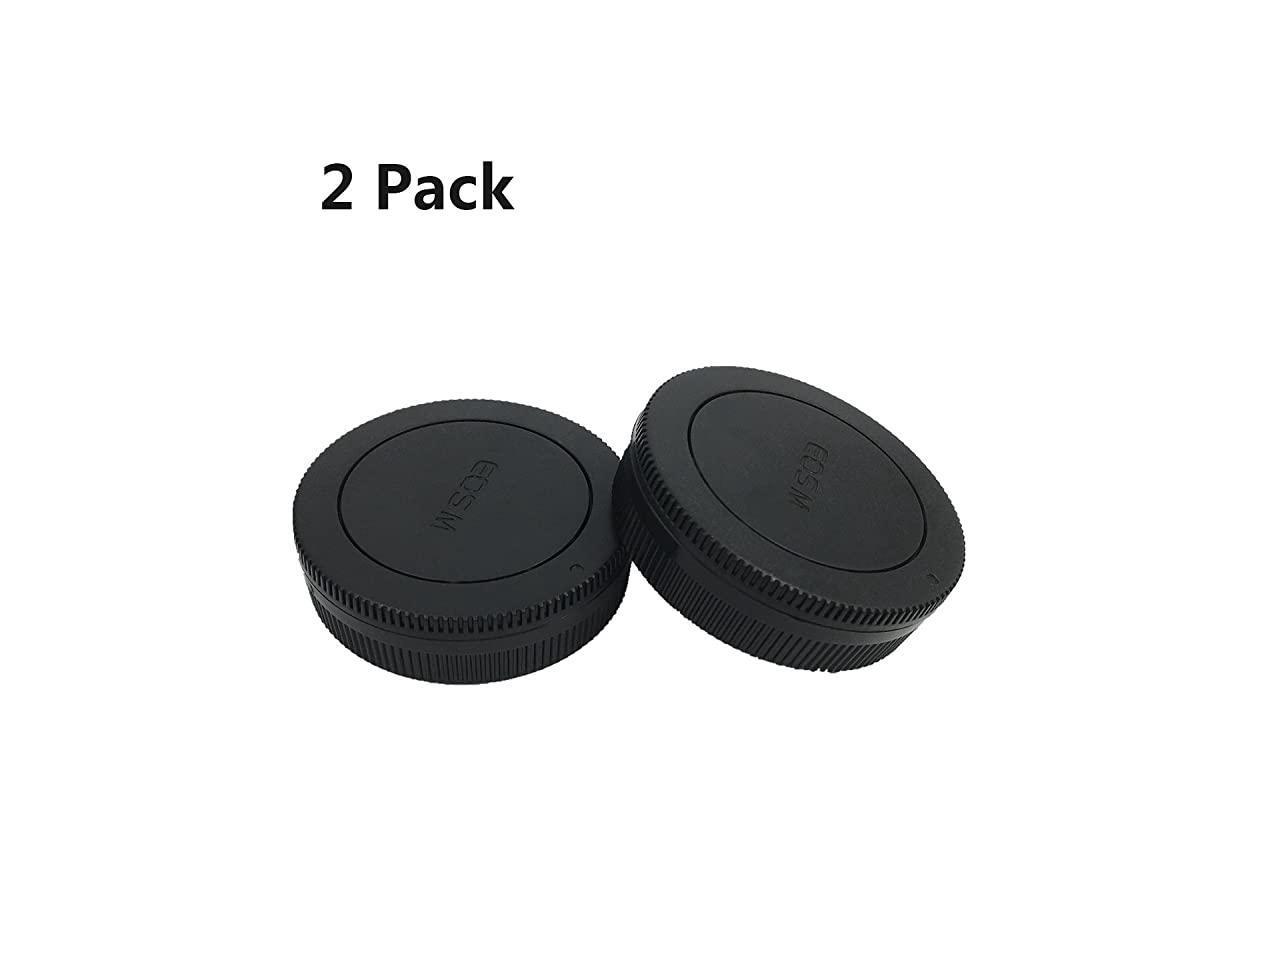 Lens Rear Cap and Body Cap for CANON EOS M Mirrorless Camera M2 M3 M10 M5 M6 